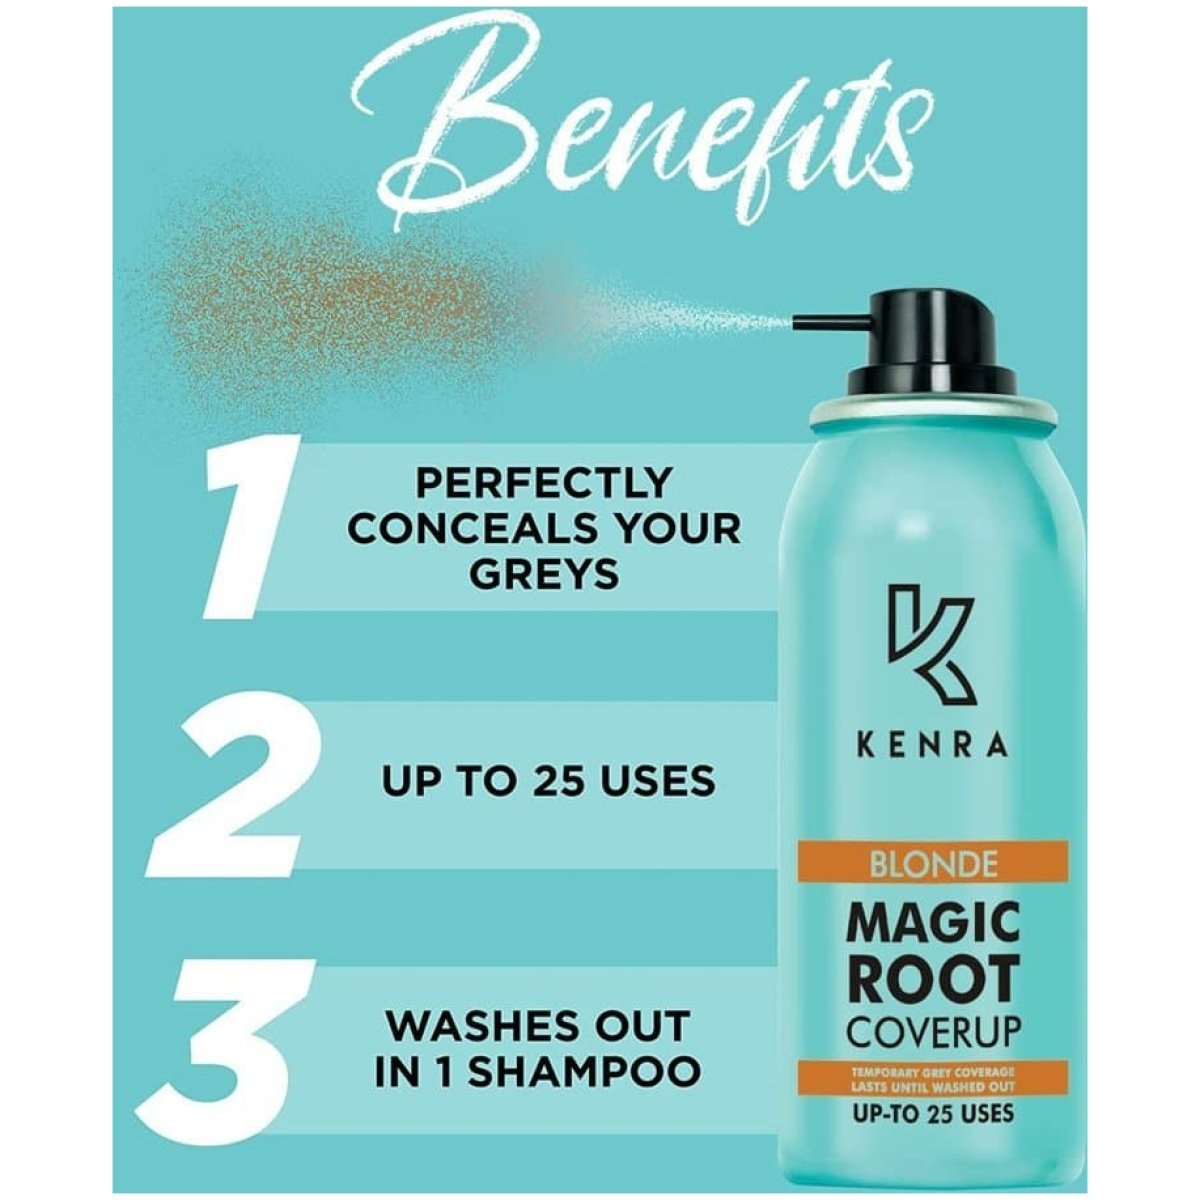 Kenra Magic Retouch Temporary Root Touch Up Hair Colour Spray 75ml Blonde